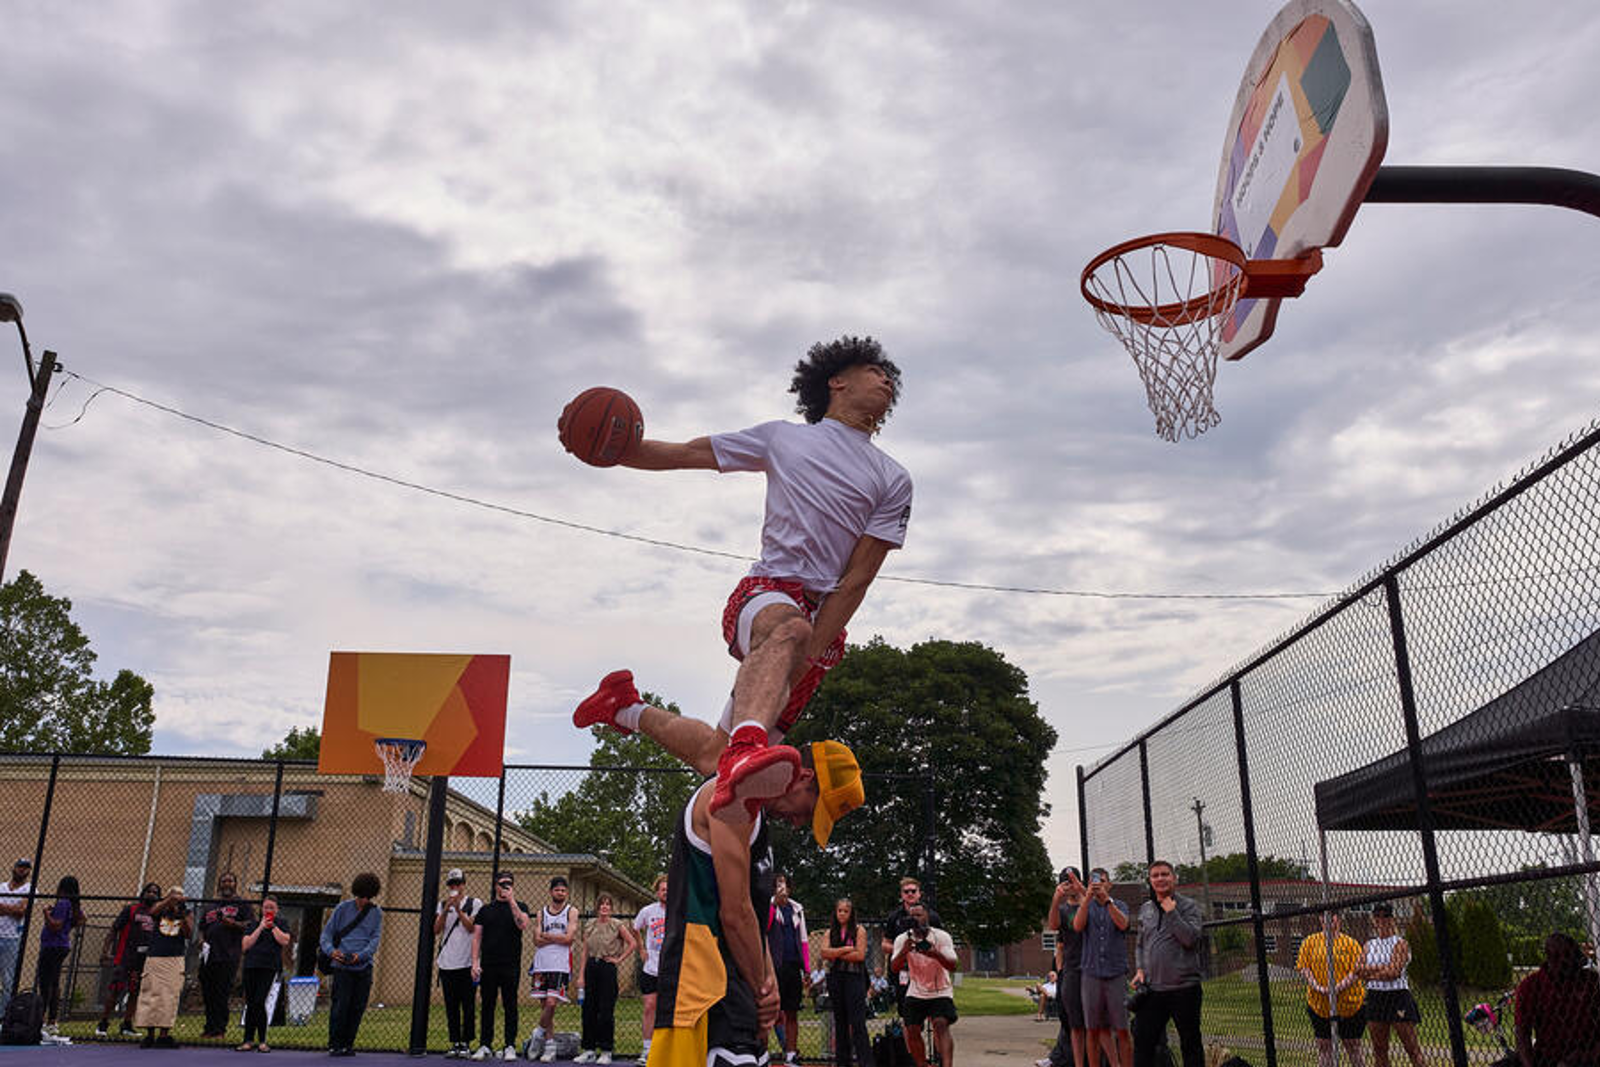 Basketball player dunking on a new goal in Watkins Park